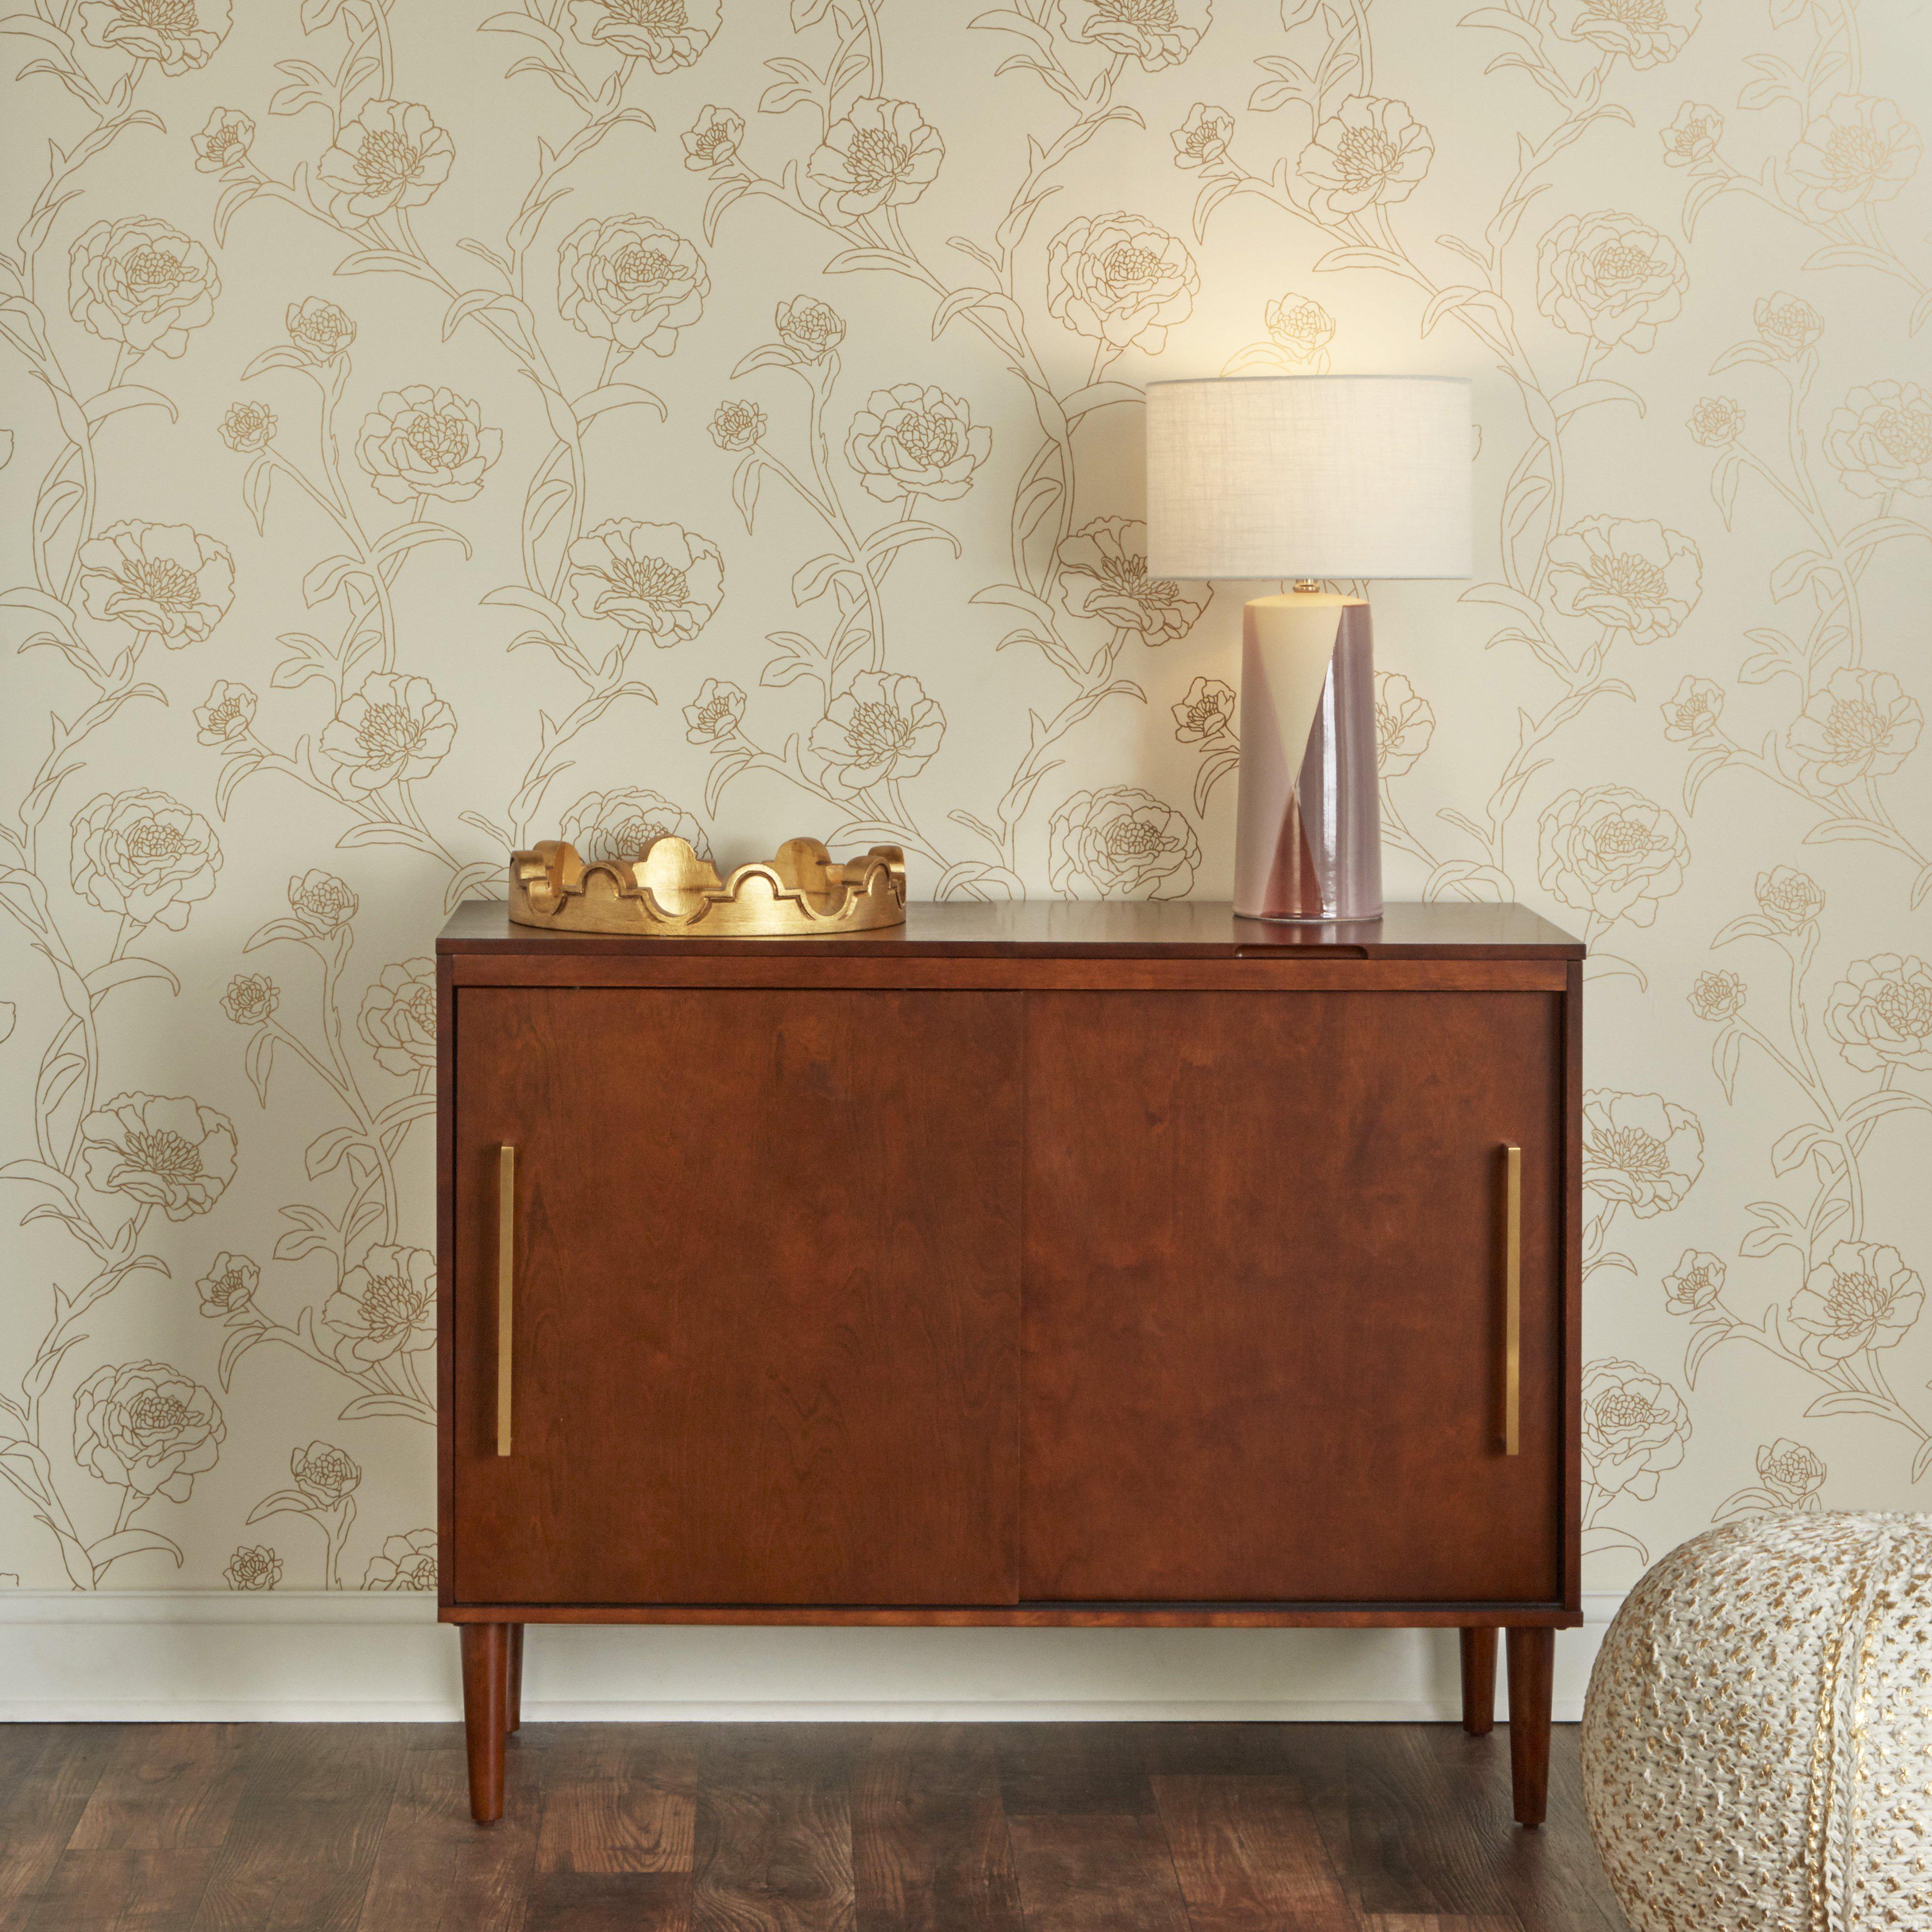 Tempaper Designs LIFESTYLE - Peonies Gold Leaf Peel and Stick Wallpaper